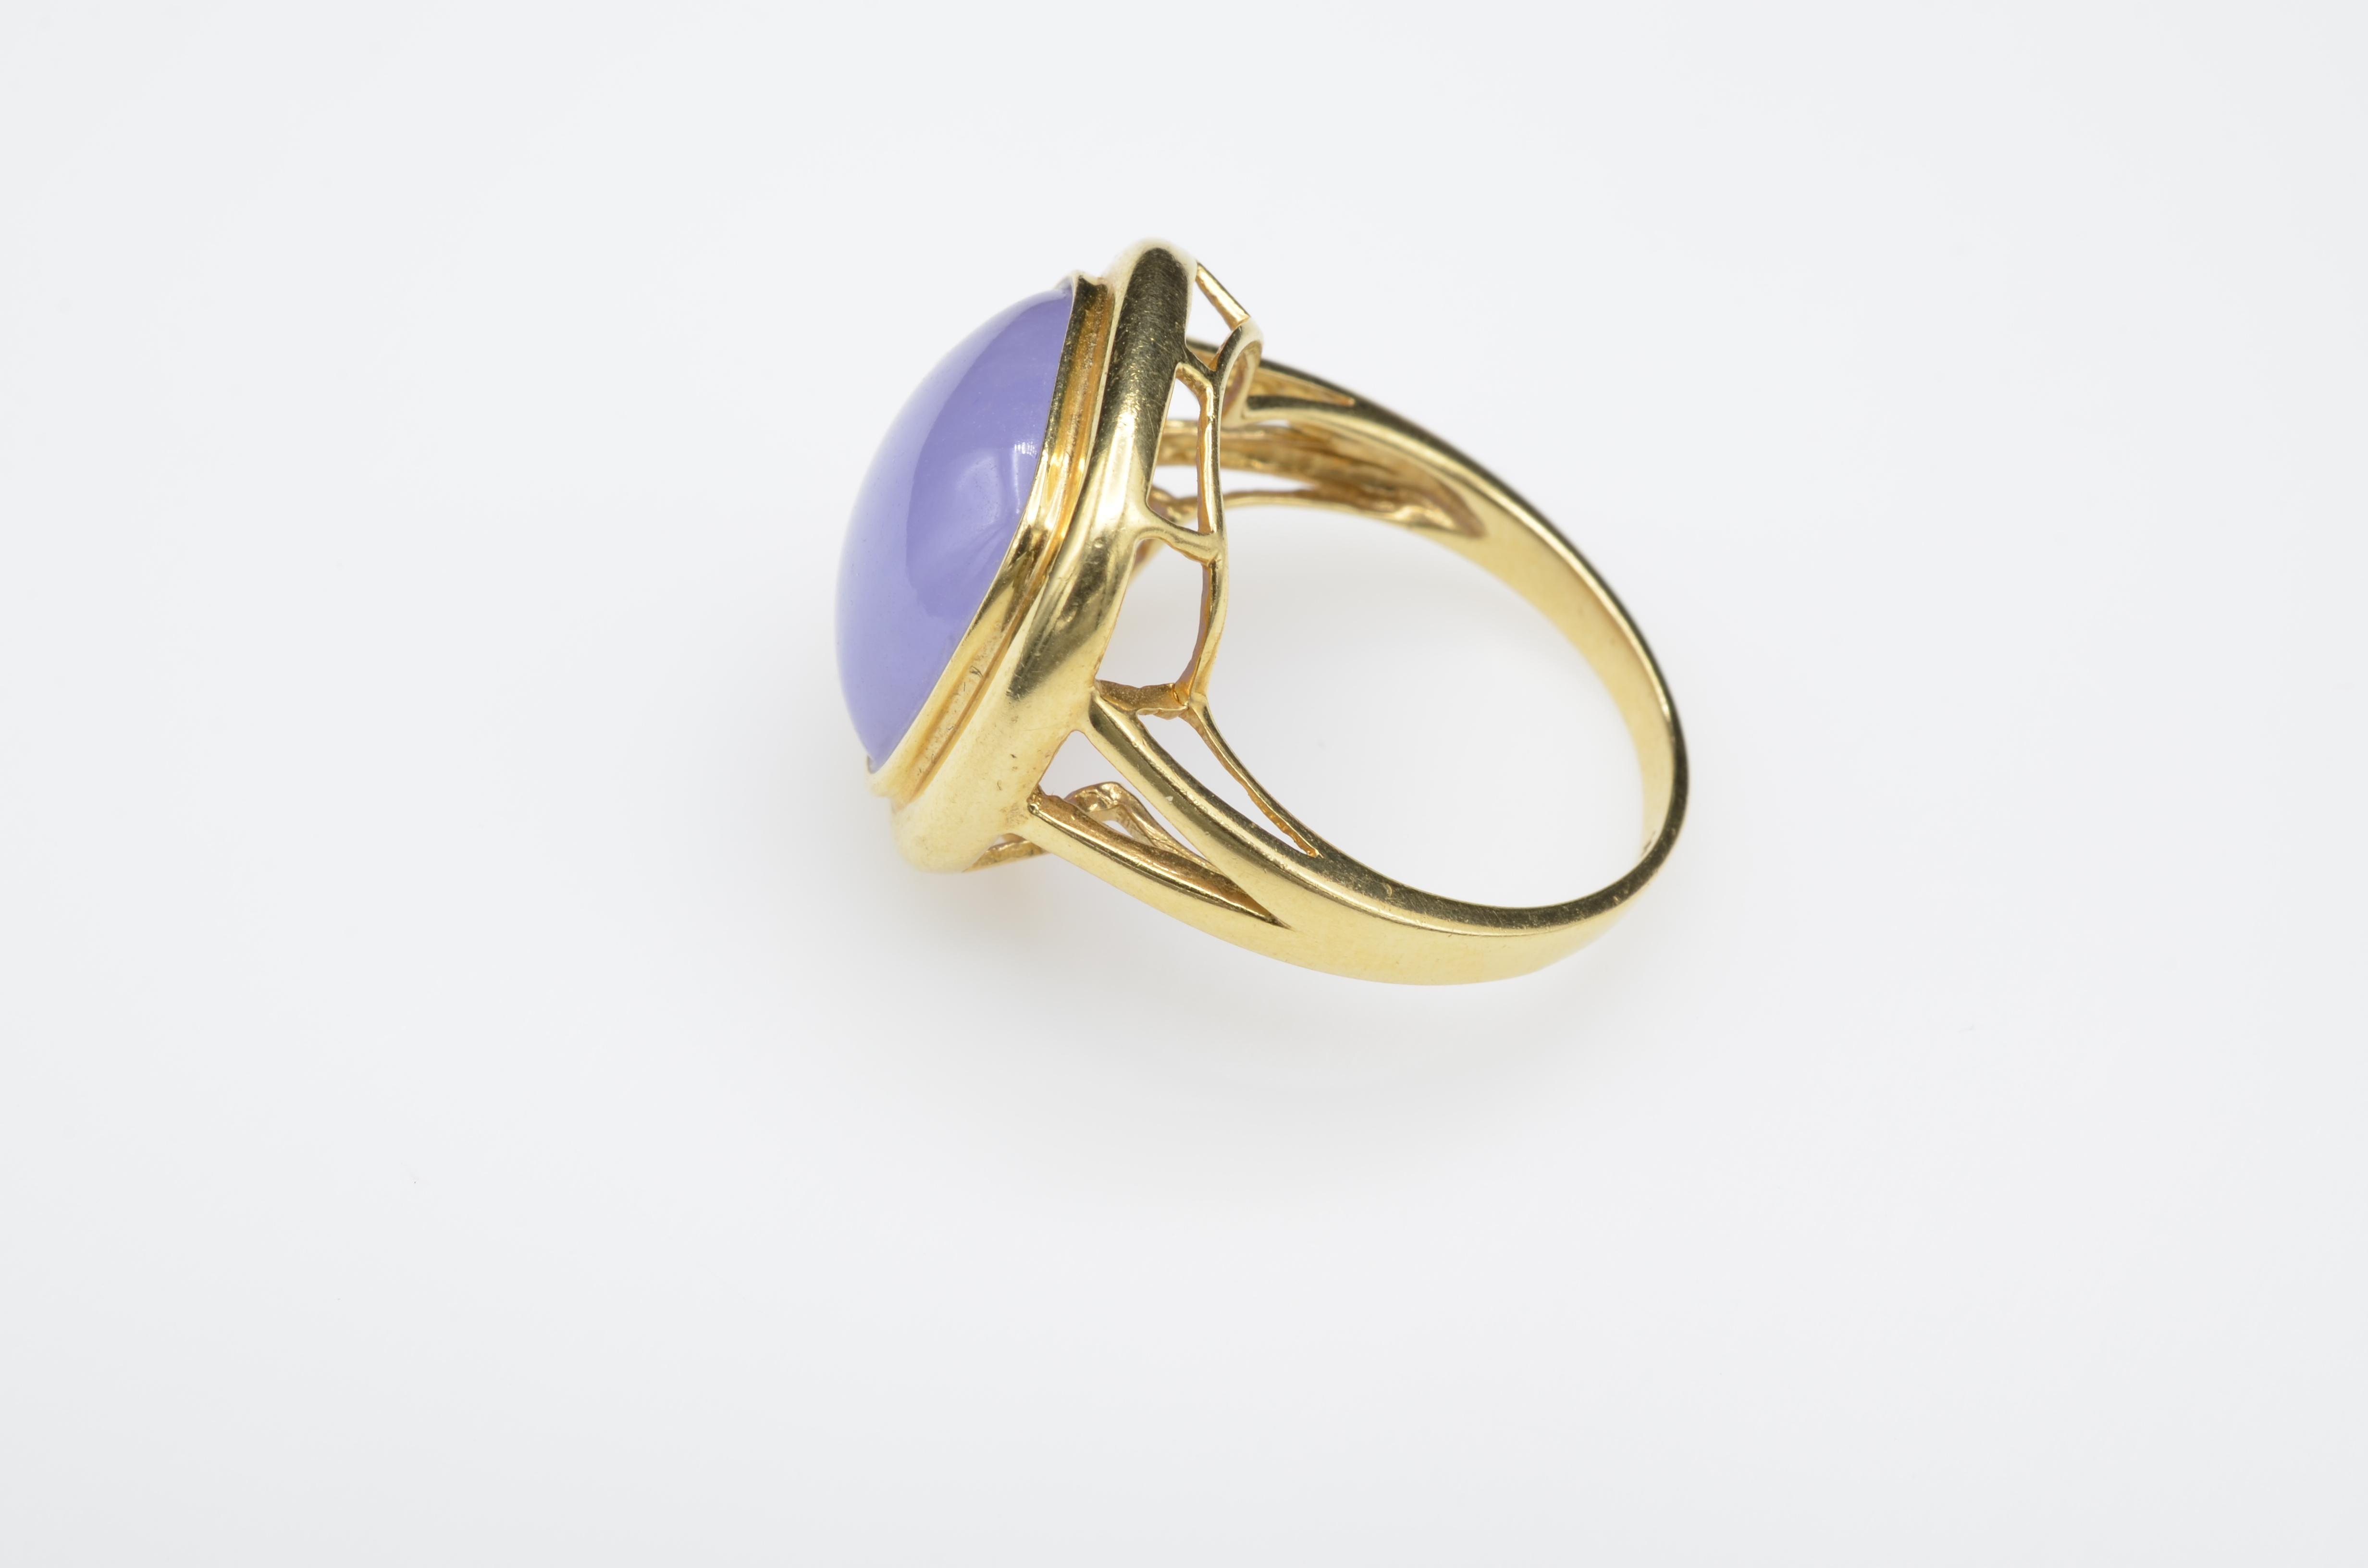 This beautiful lavender jade ring is set in 14K yellow gold and most likely dyed giving it a warm and bright shade of purple. Set in an architectural design this ring is comfortable to wear given its substantial size. Size 9.25 and may be sized. 